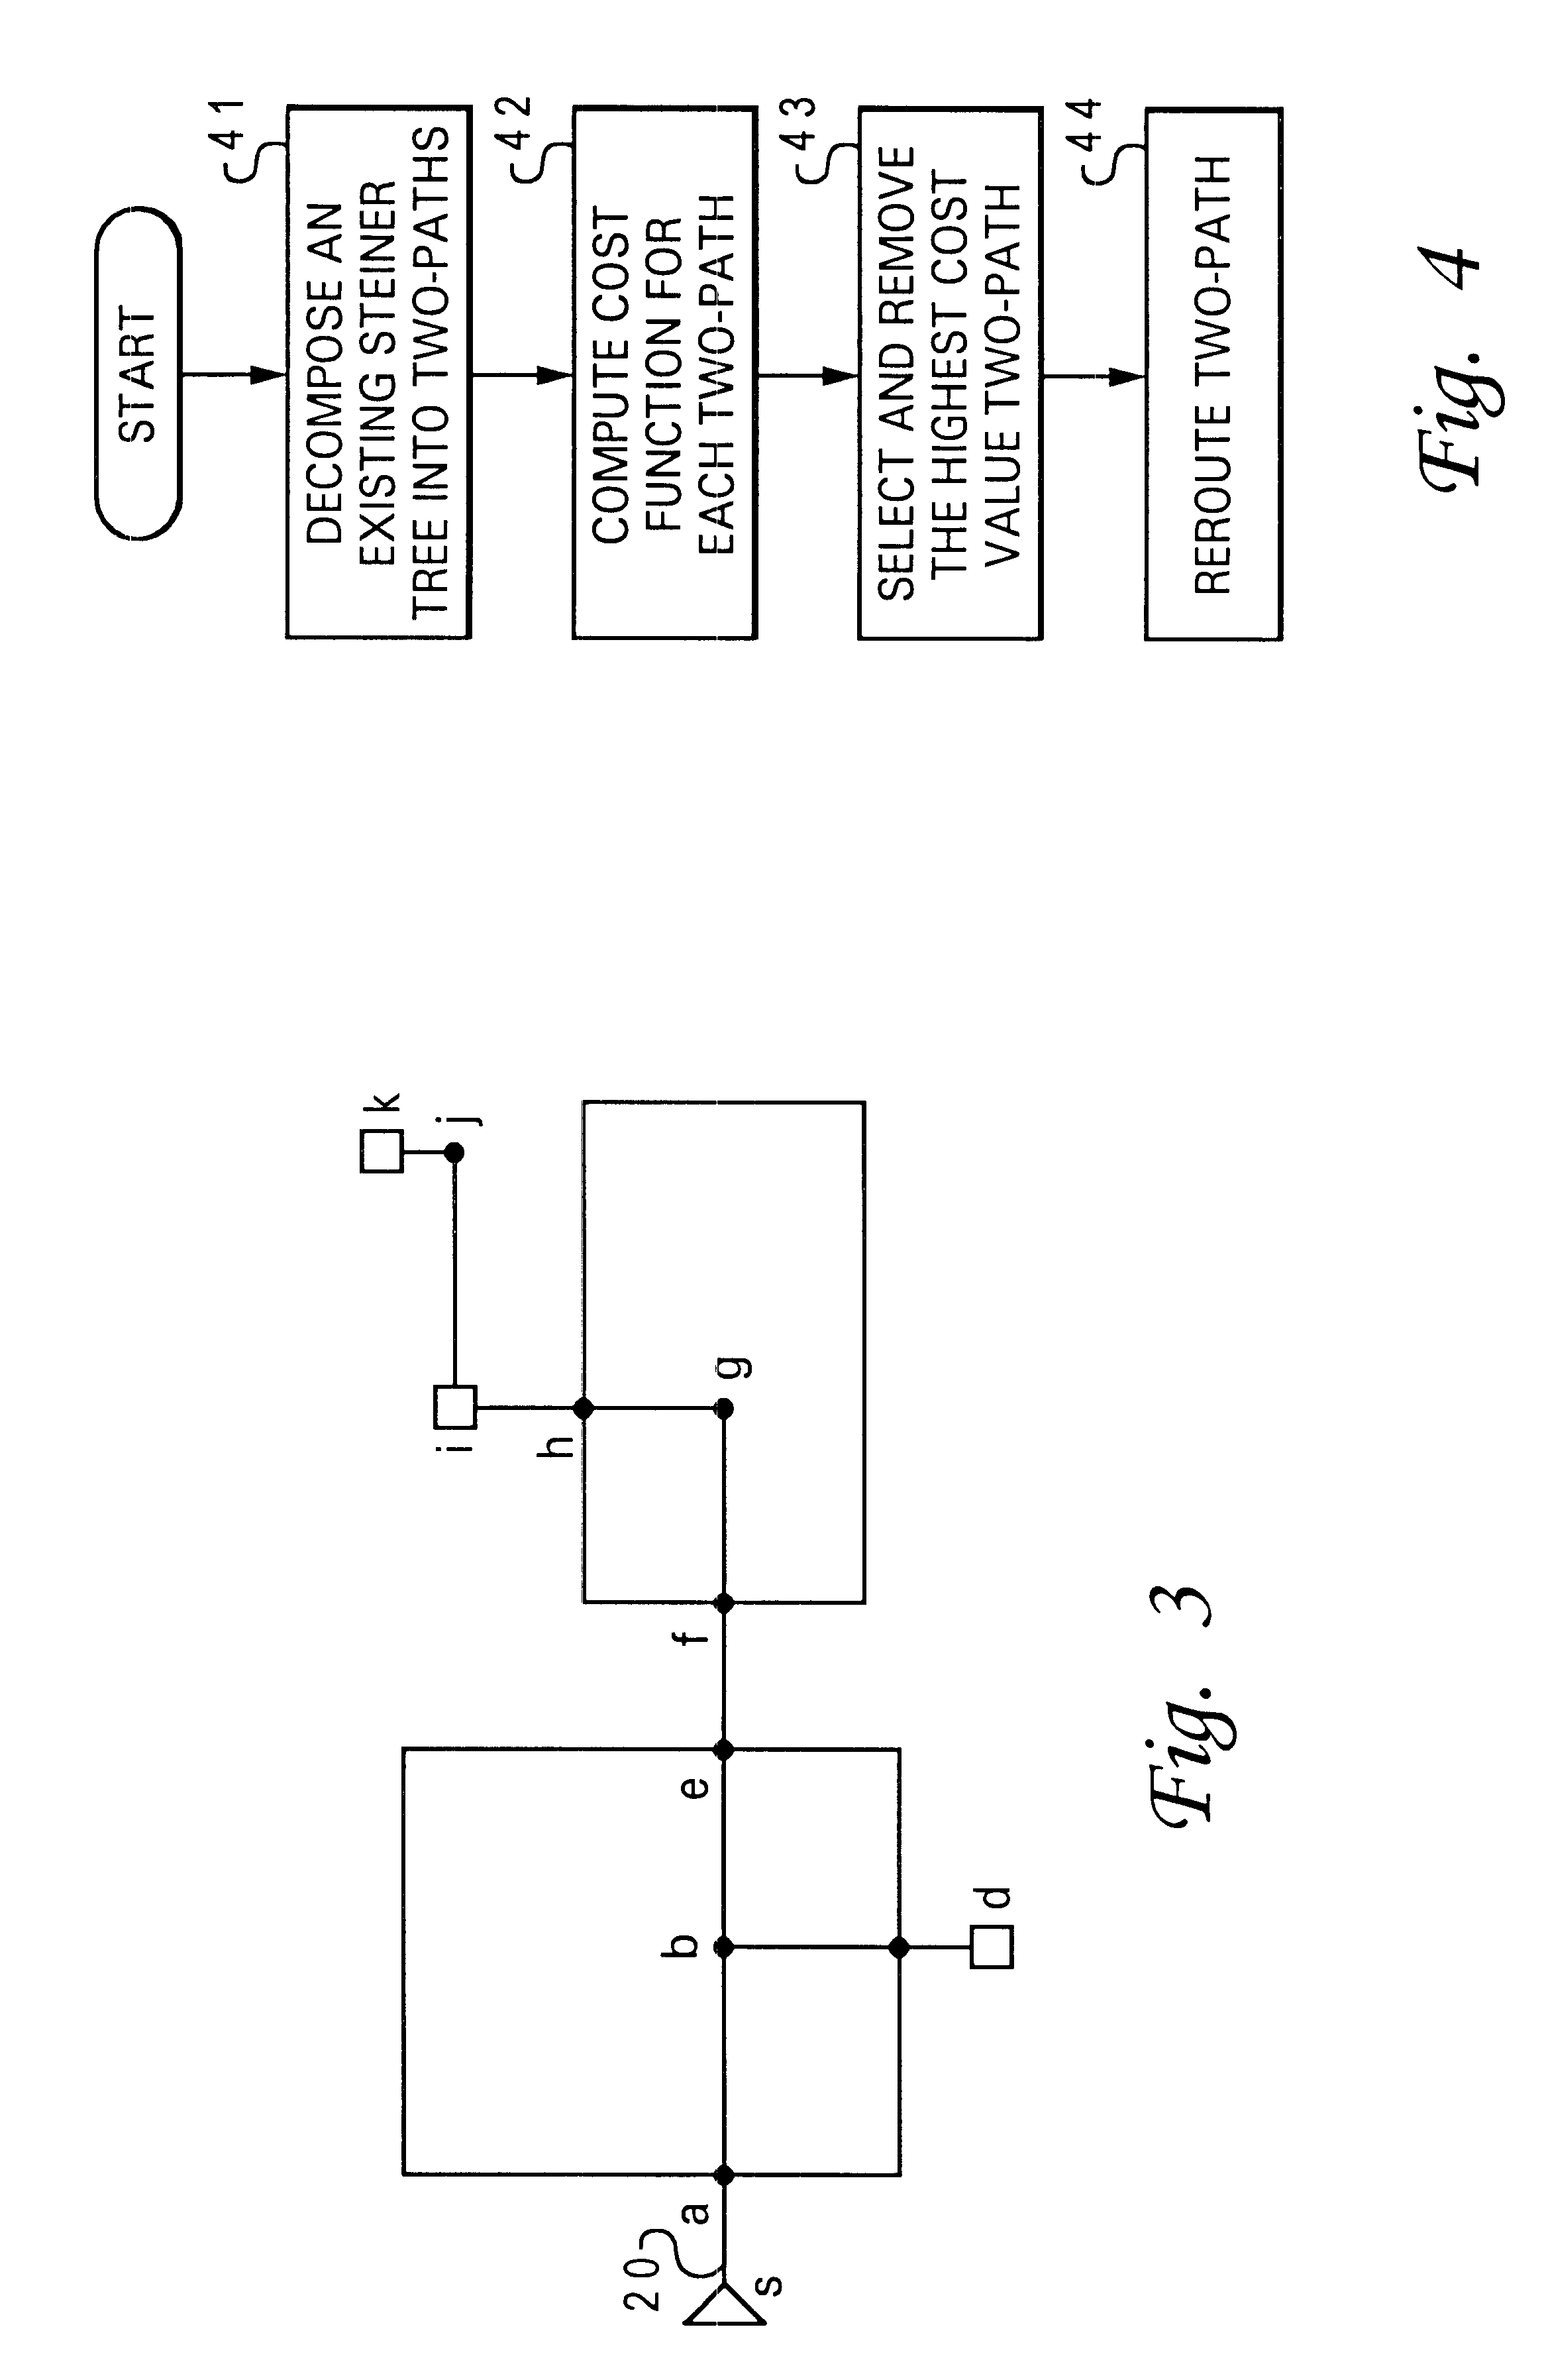 Method and system for re-routing interconnects within an integrated circuit design having blockages and bays